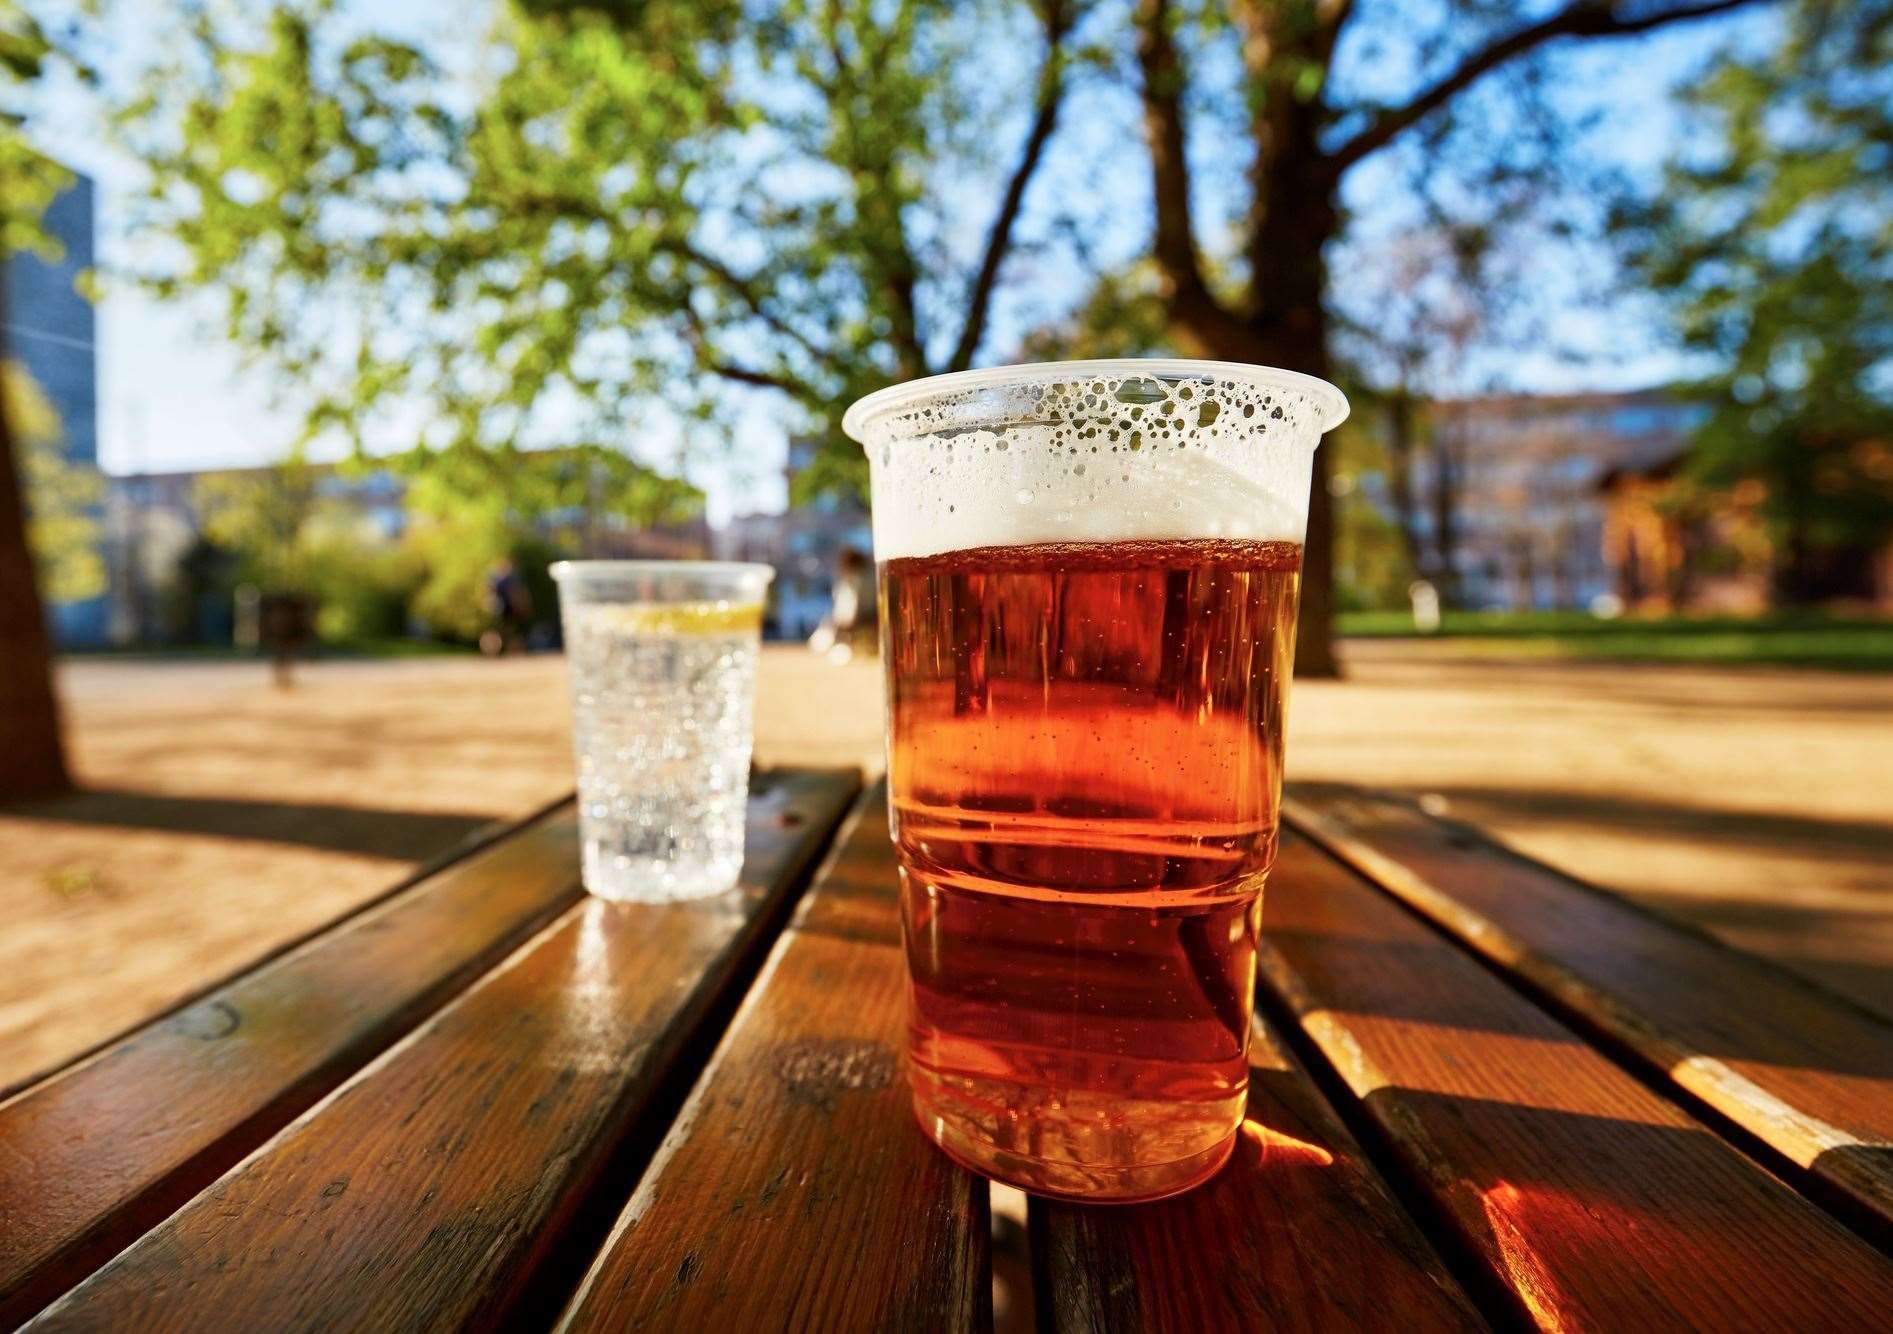 We all enjoy going to the pub – but it’s a hard justification in the face of rising costs elsewhere